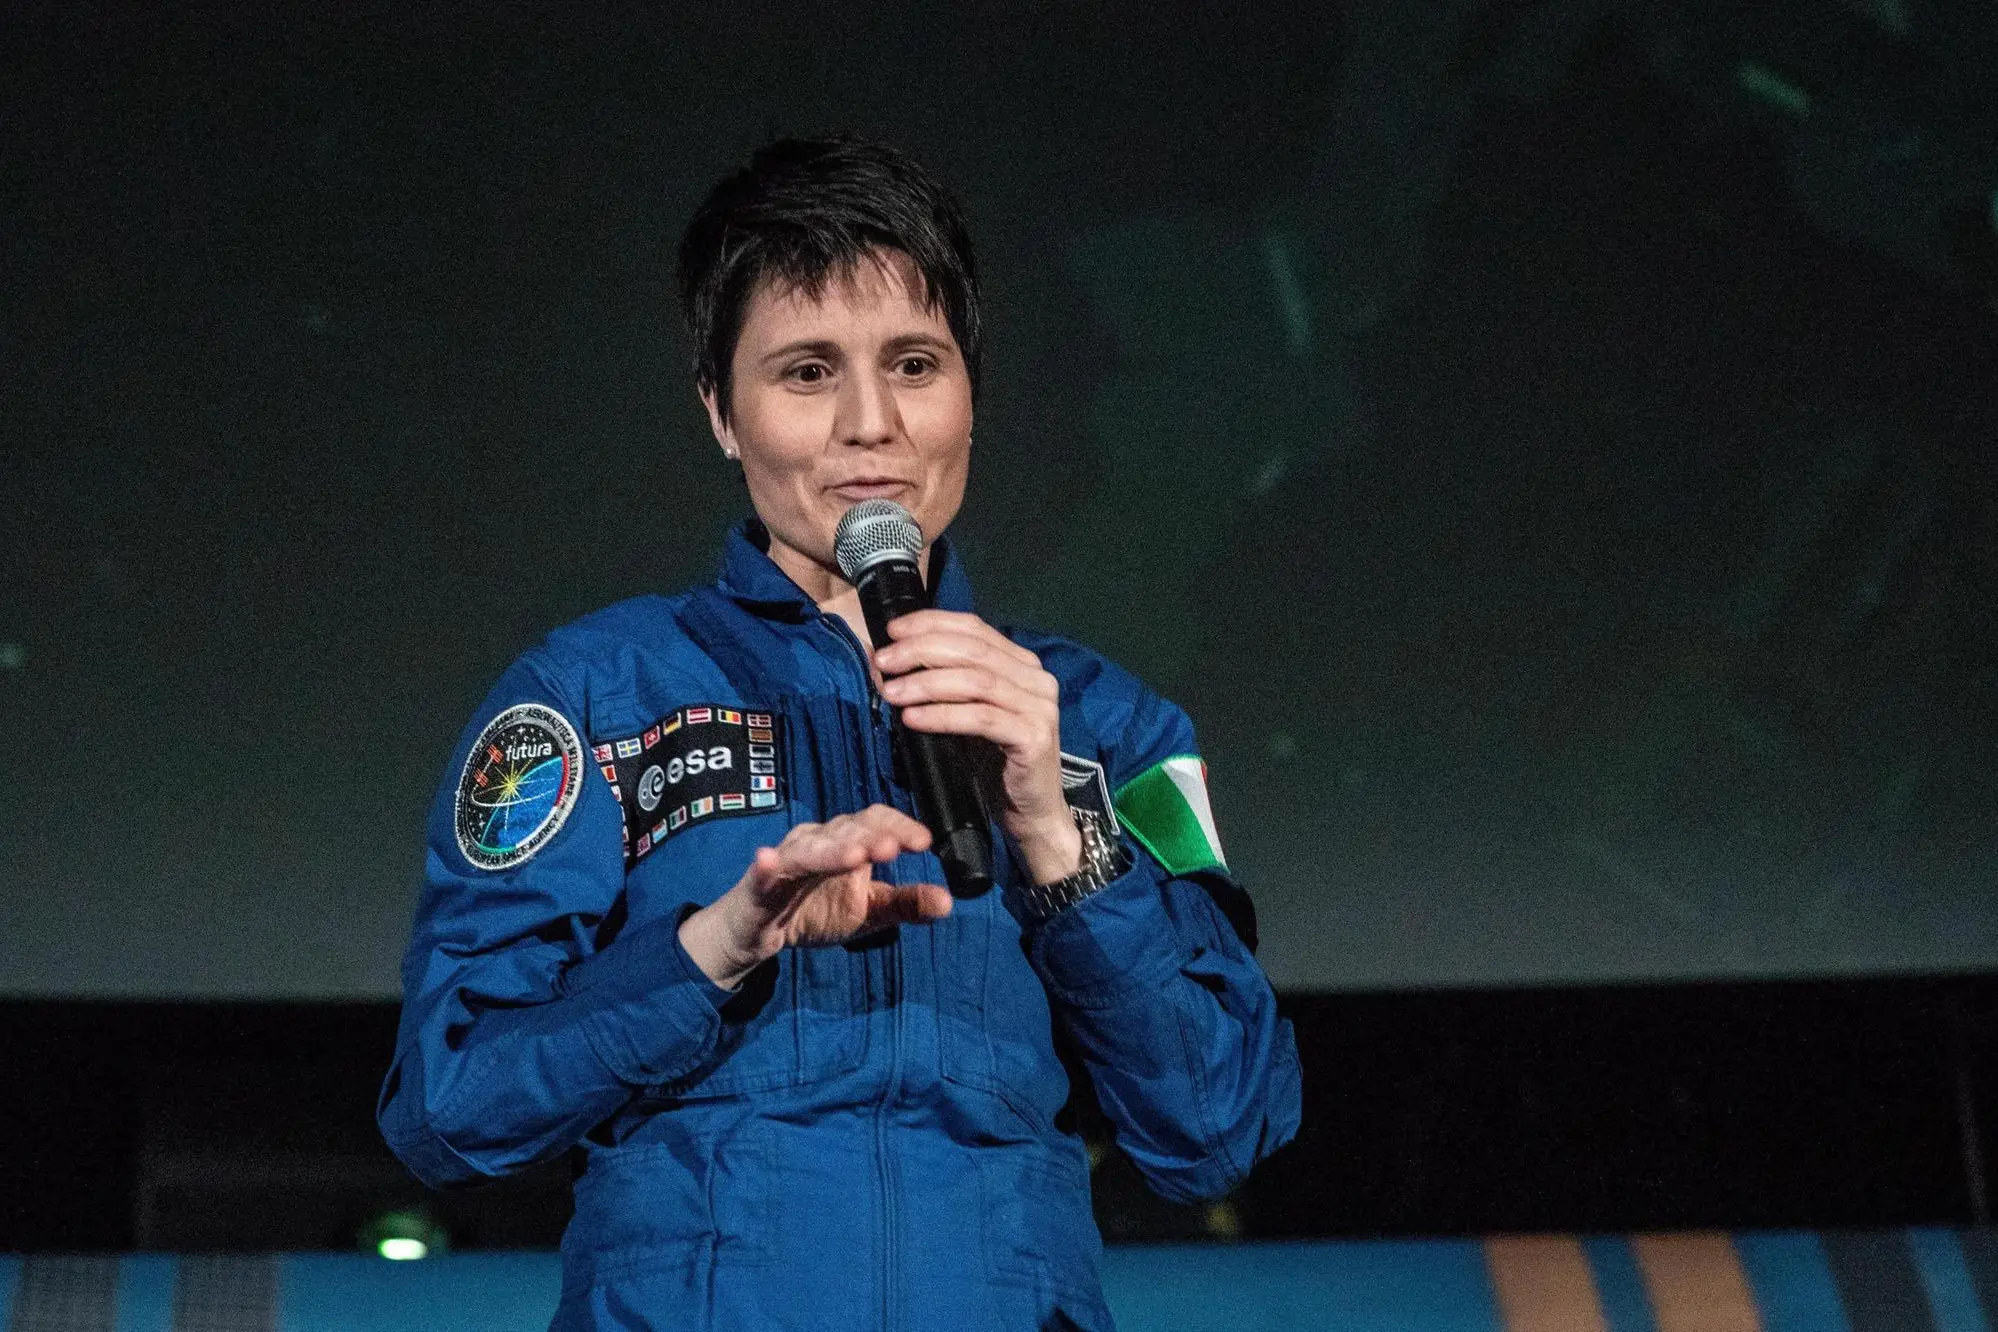 European space agency astronaut Samantha Cristoforetti delivers an explanation about the international space station, prior to a live screening of the Soyuz MS-09 spacecraft lift off at the Zeiss Gross-planetarium in Berlin, Germany, 06 June 2018. ANSA/OMER MESSINGER